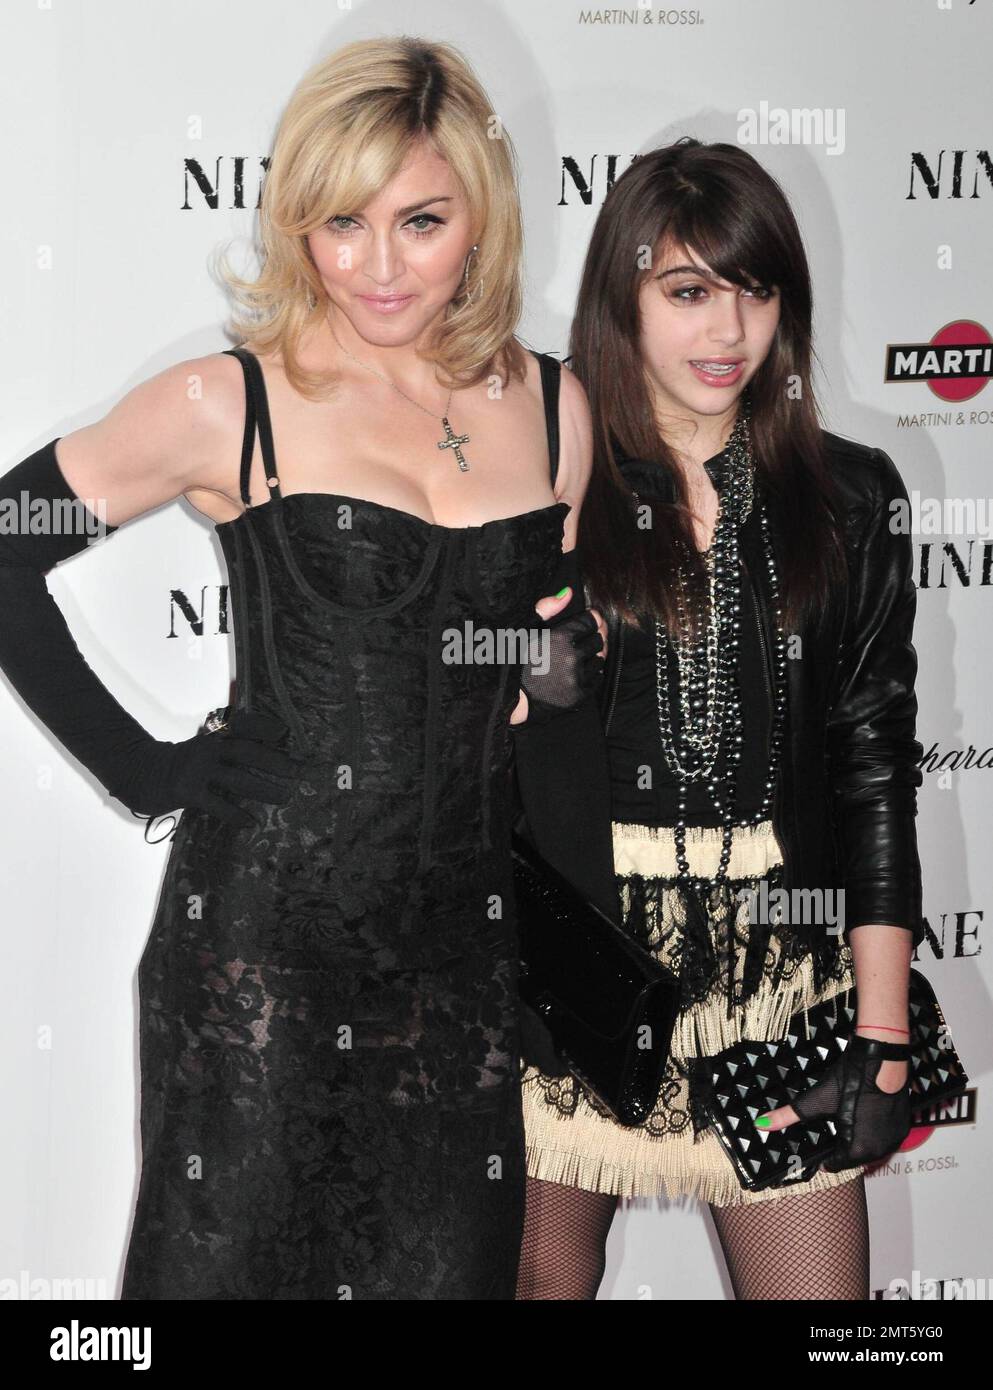 Madonna and daughter Lourdes Leon at the premiere of Nine held at the Ziegfeld Theatre in Manhattan, New York. NY. 12/15/09. Stock Photo